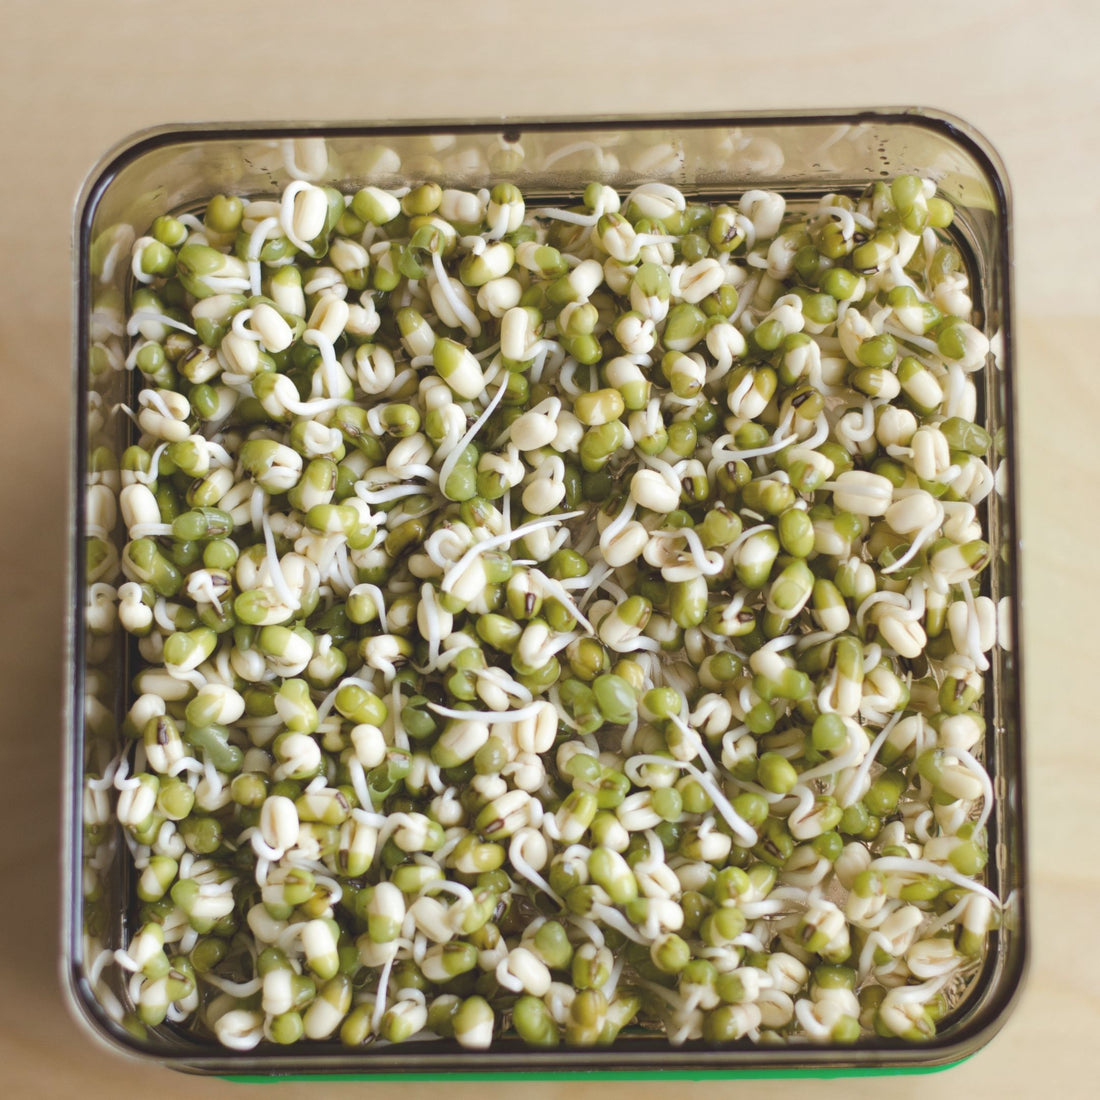 How to Sprout Mung Beans at Home